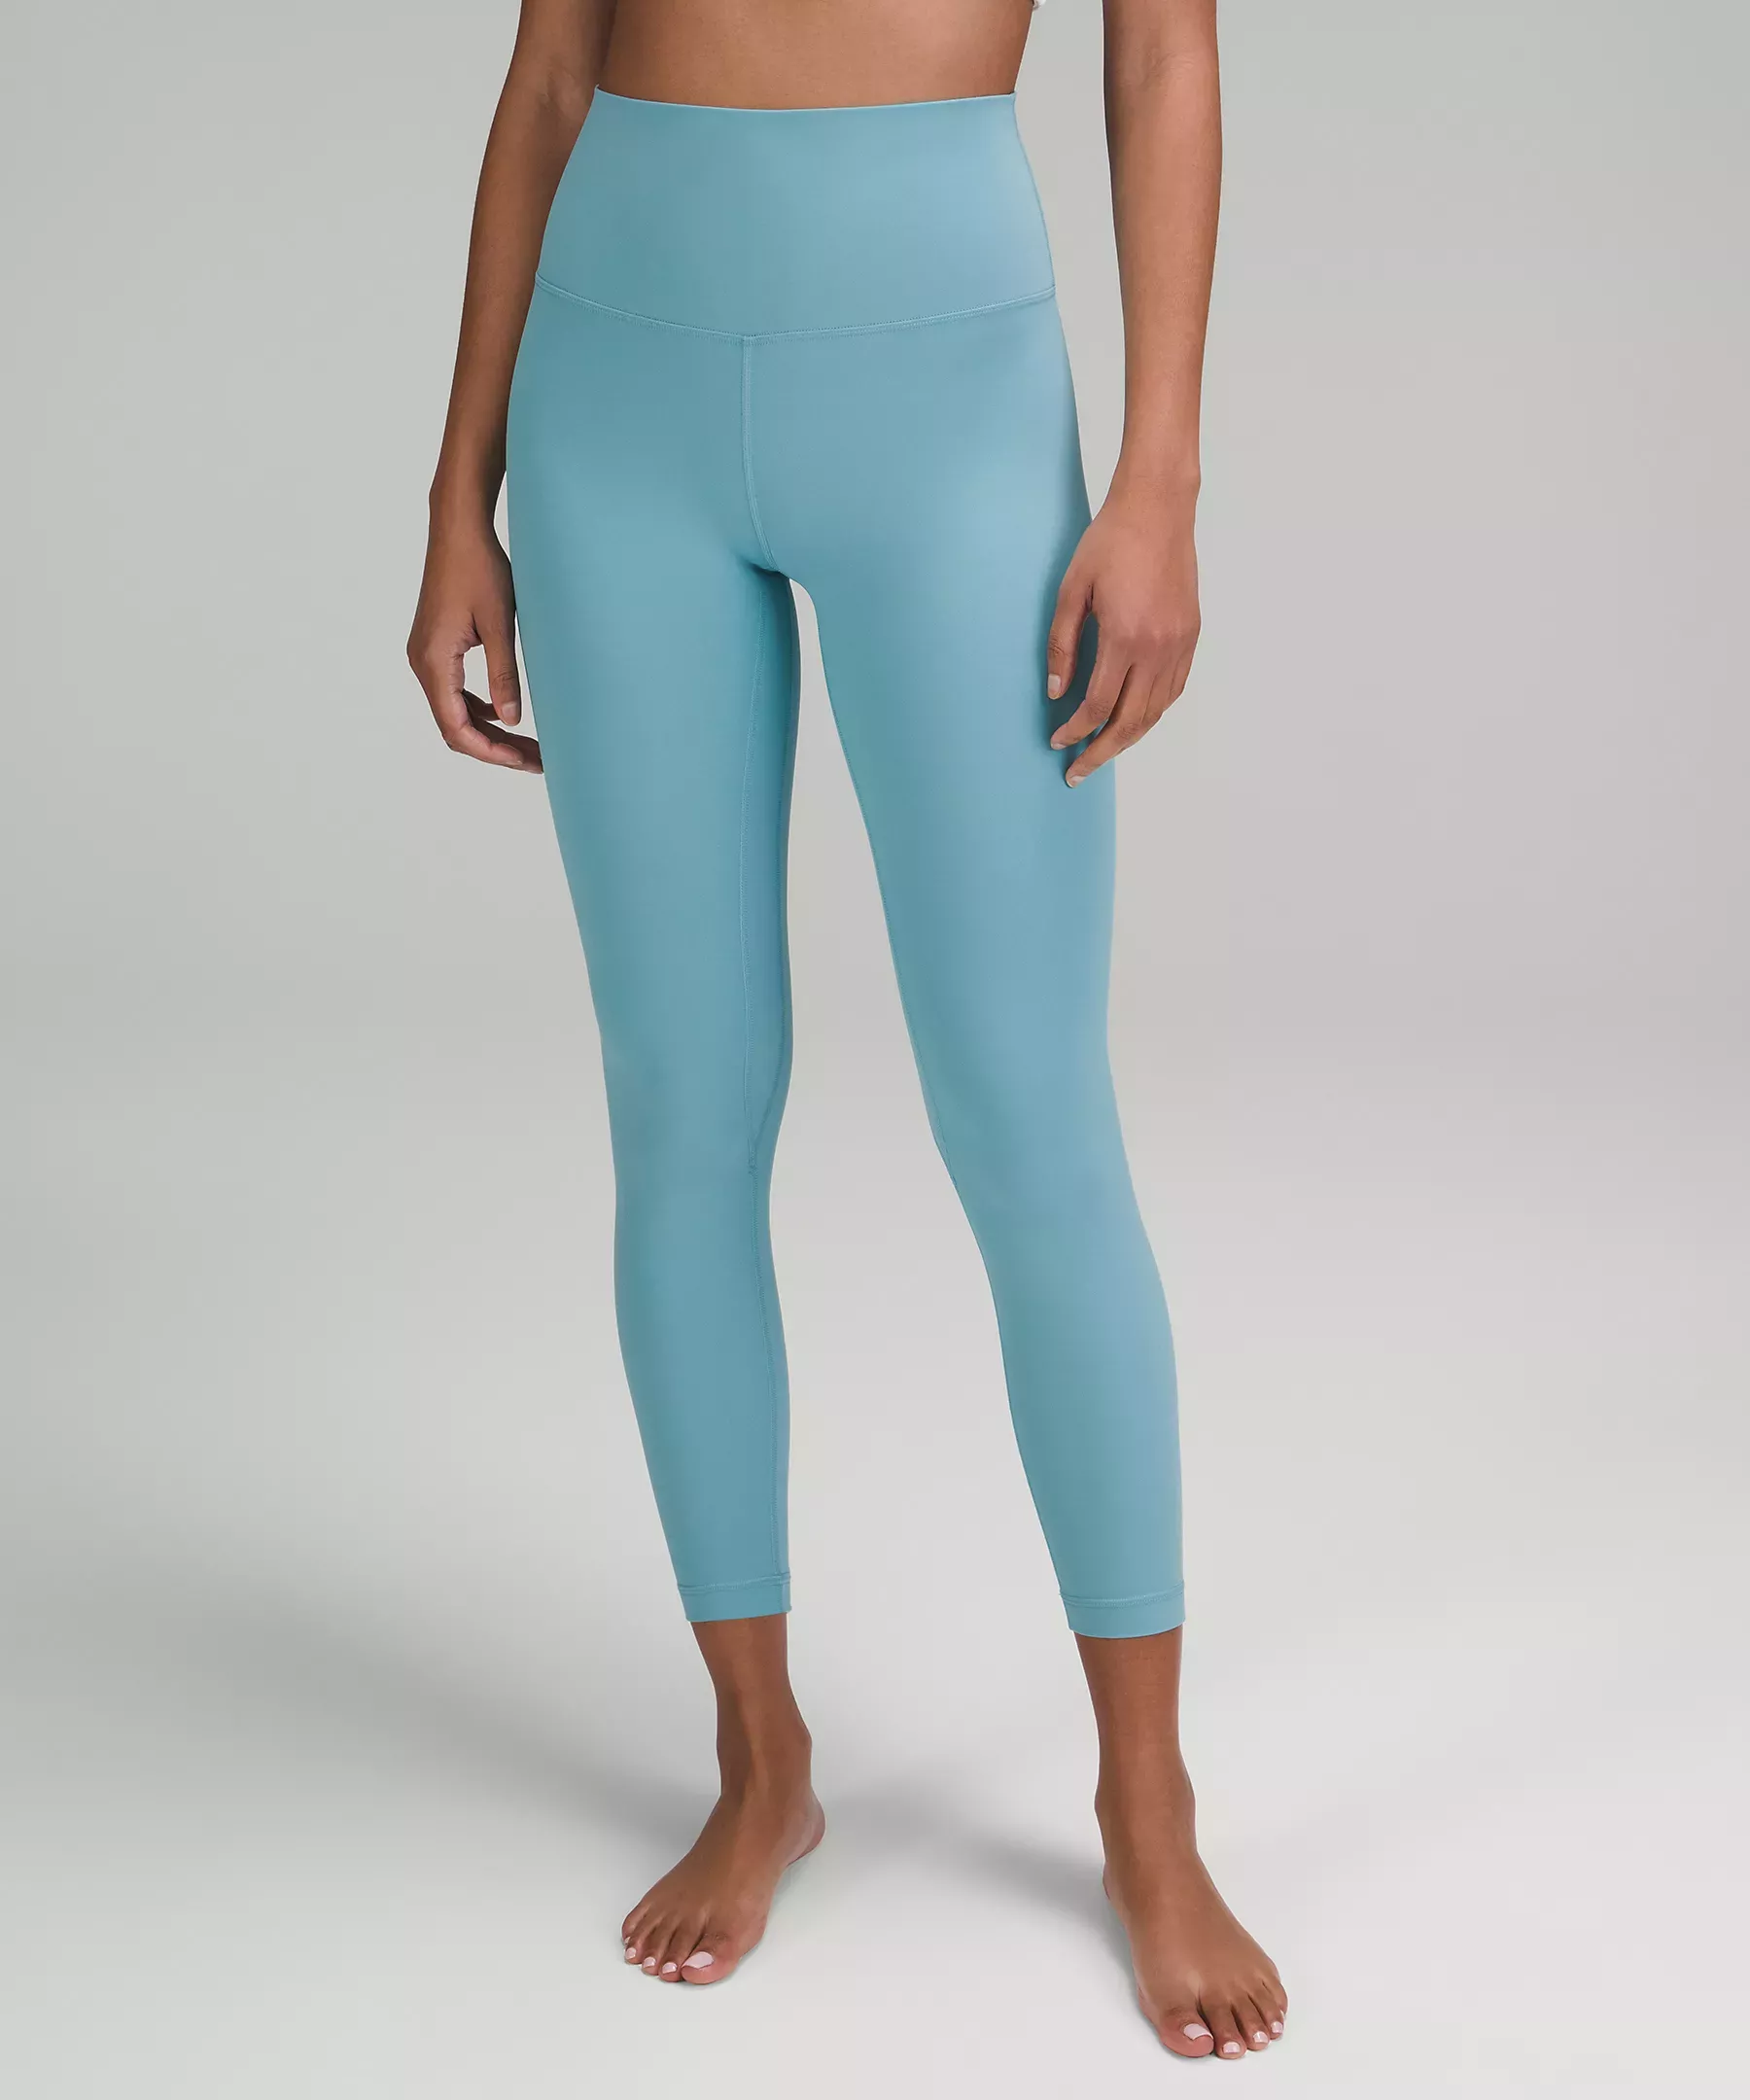 Lululemon Invigorate High-Rise Tight 25 Pink Size 4 - $51 (60% Off Retail)  - From Rachel